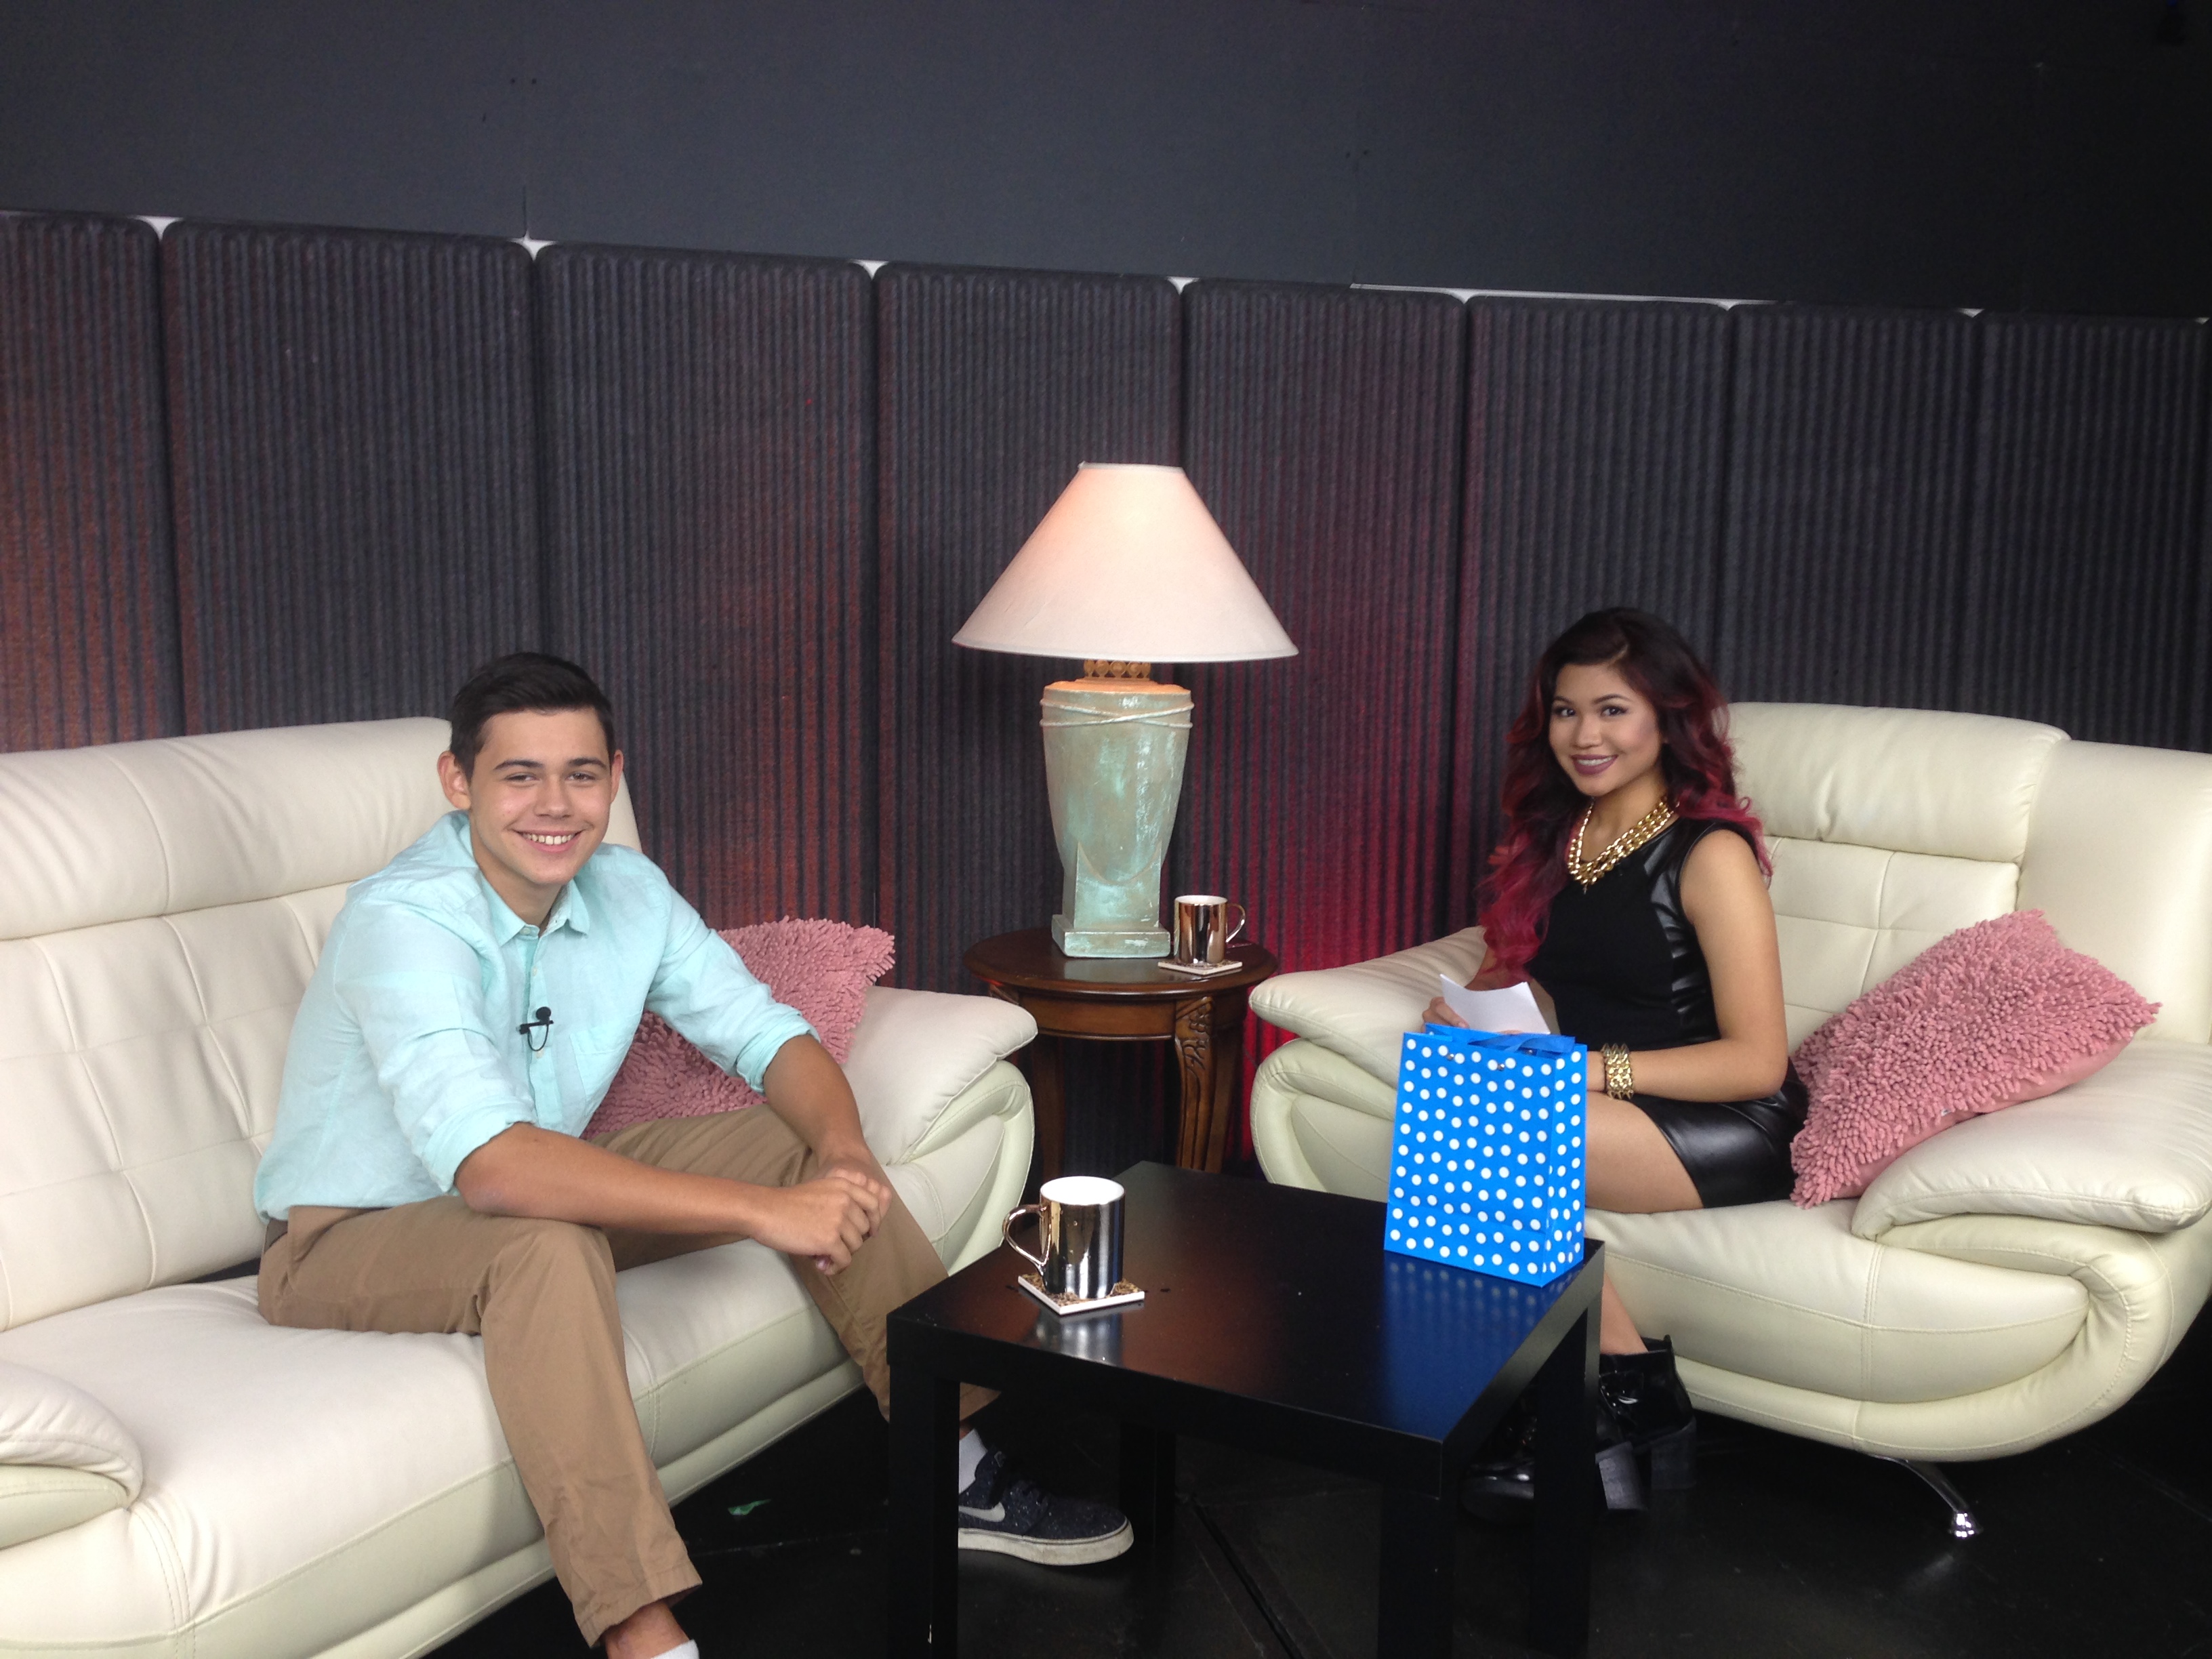 Peter was a Guest on EveRIAthing show. Peter enjoyed his interview with the lovely Ria!